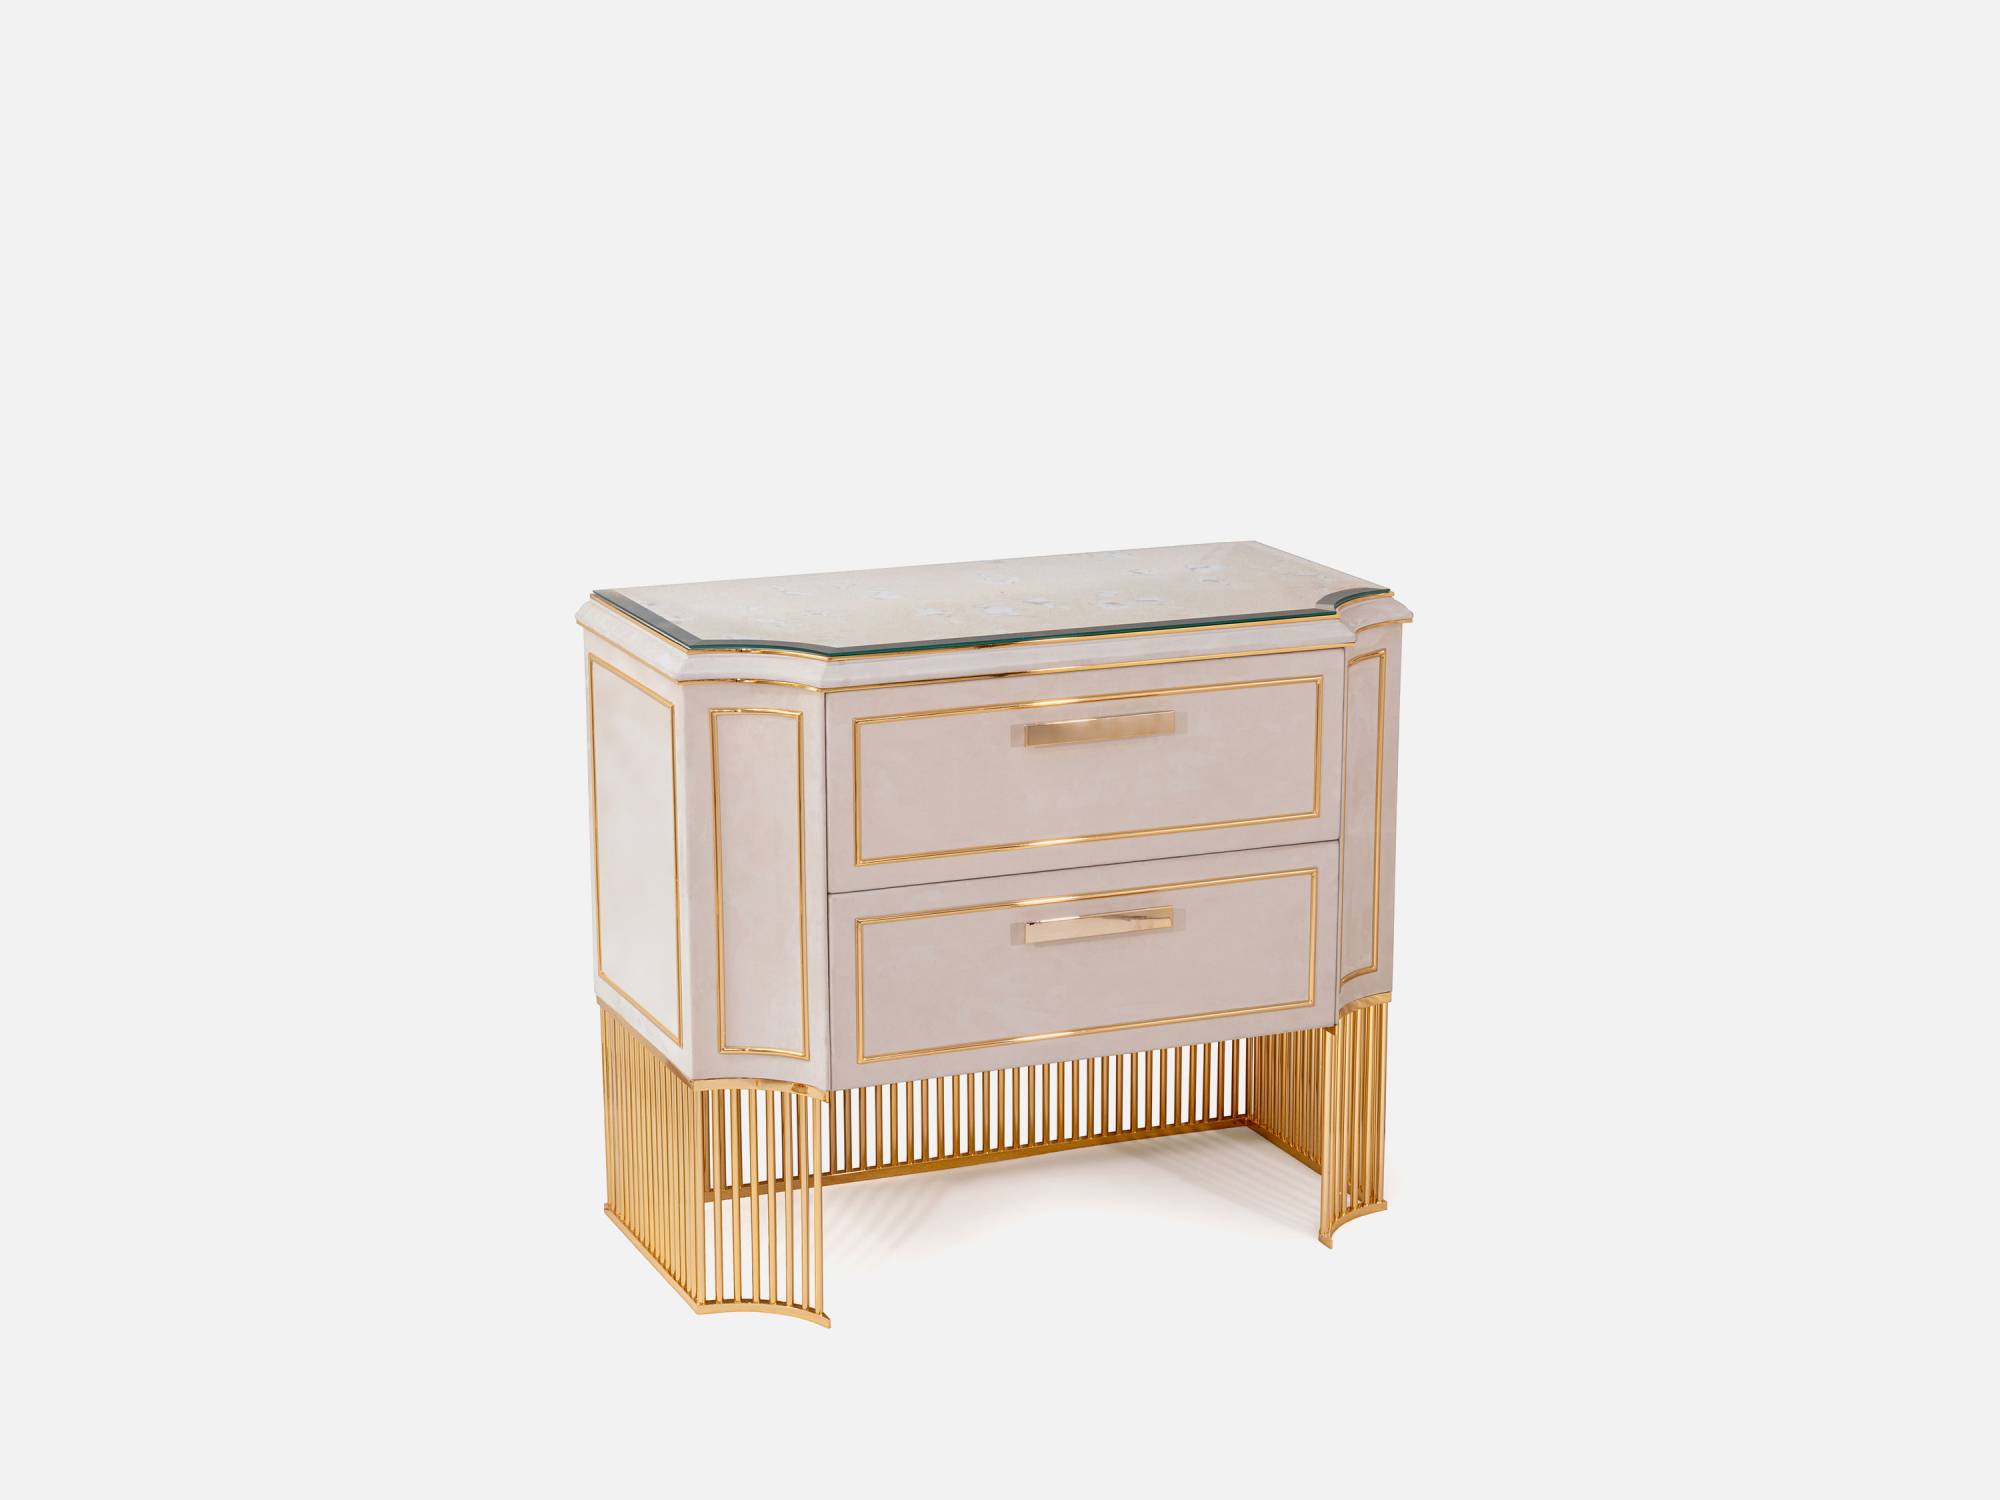 ART. 2333 - C.G. Capelletti quality furniture with made in Italy contemporary Bedside tables